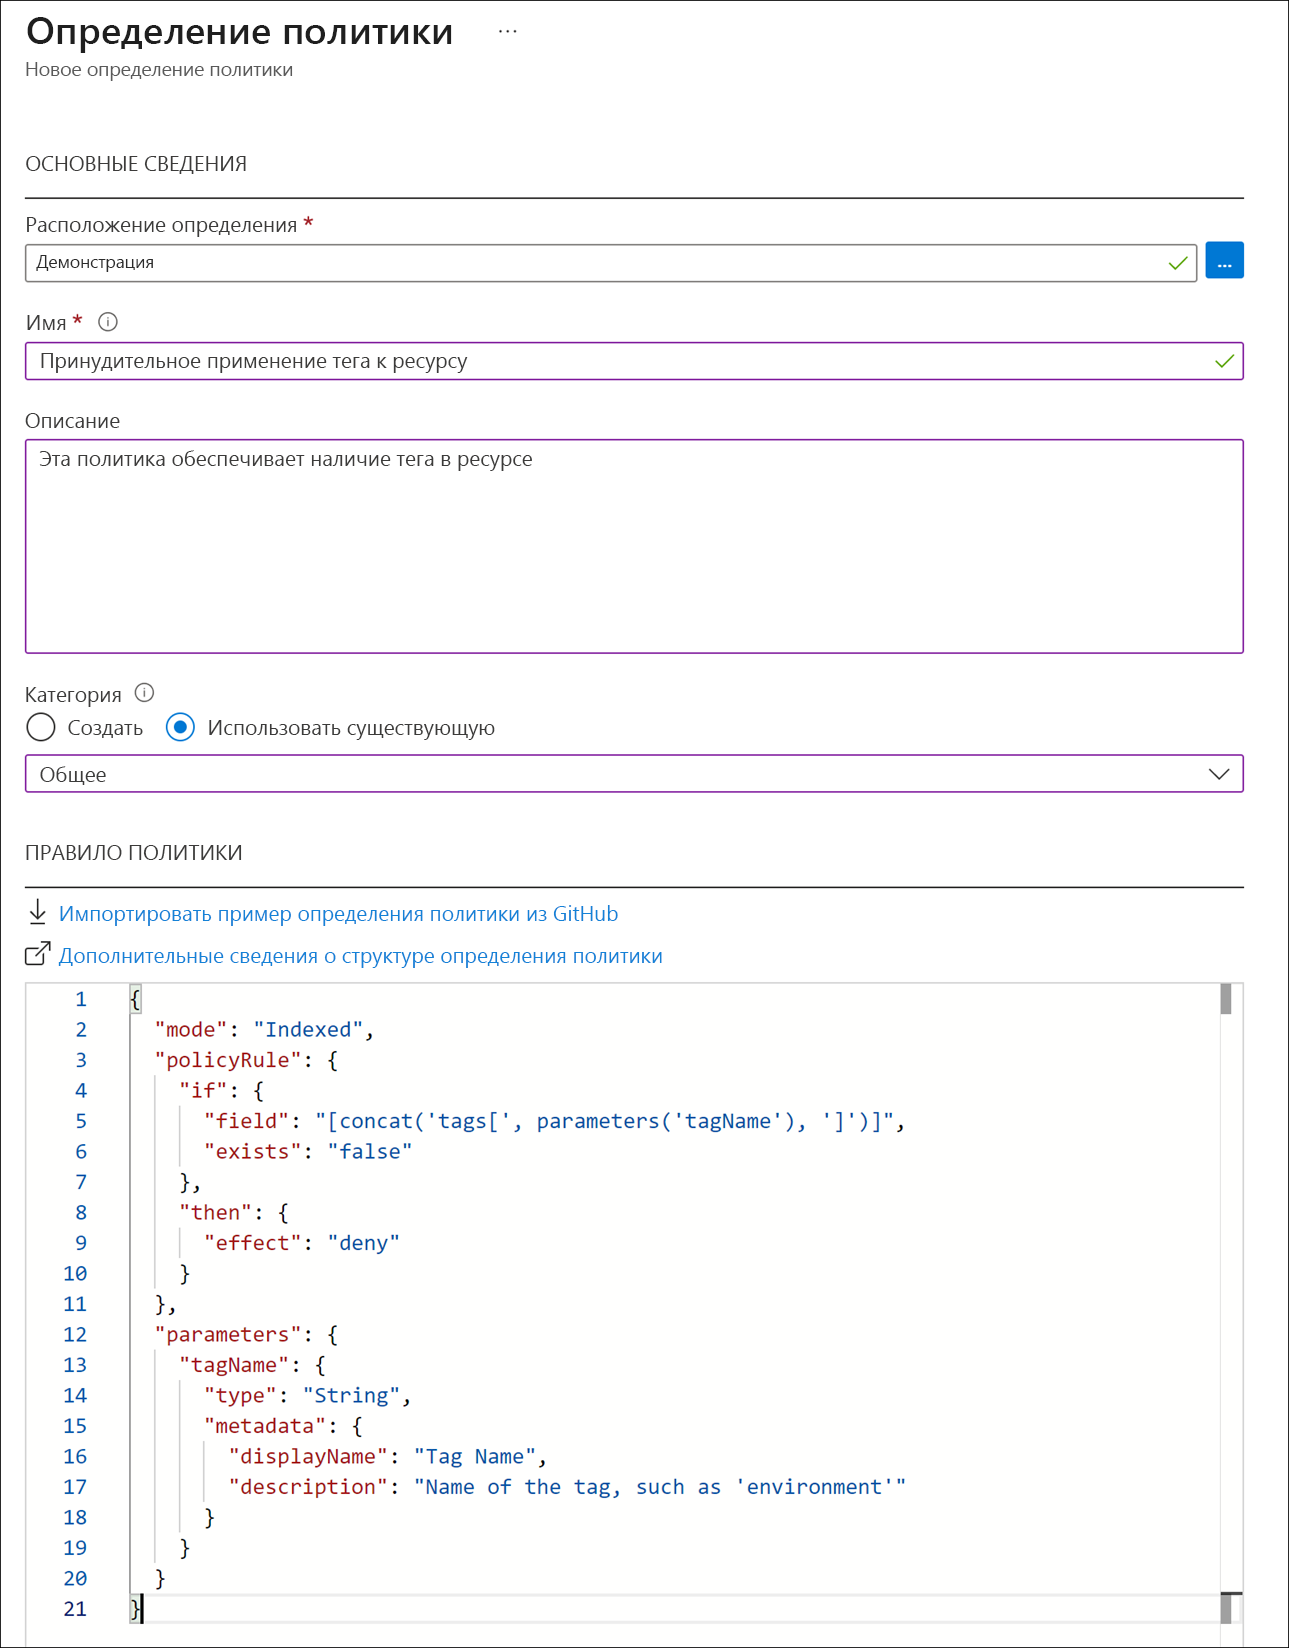 Screenshot of Azure portal showing the new policy definition dialog.